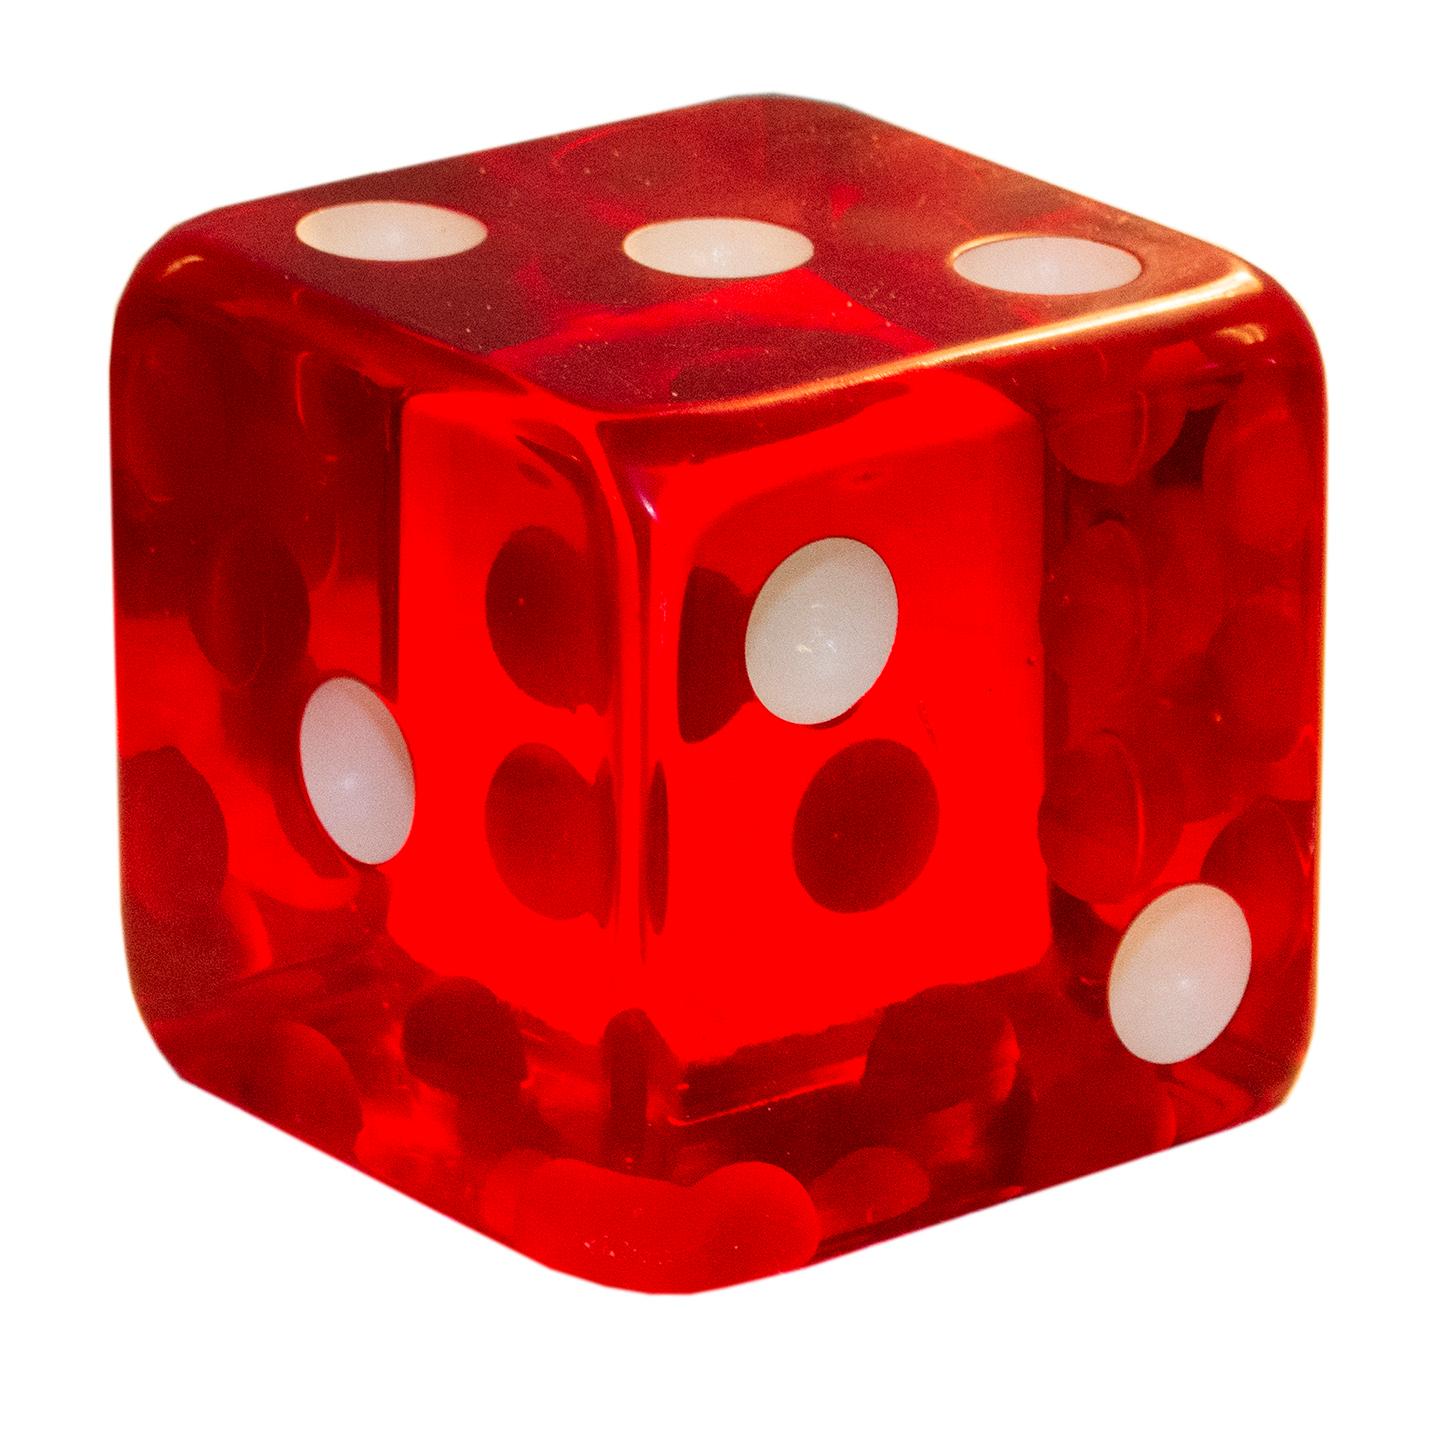 American Twentieth Century Pair of Red Dice by Mark Yurkiw, Artist For Sale